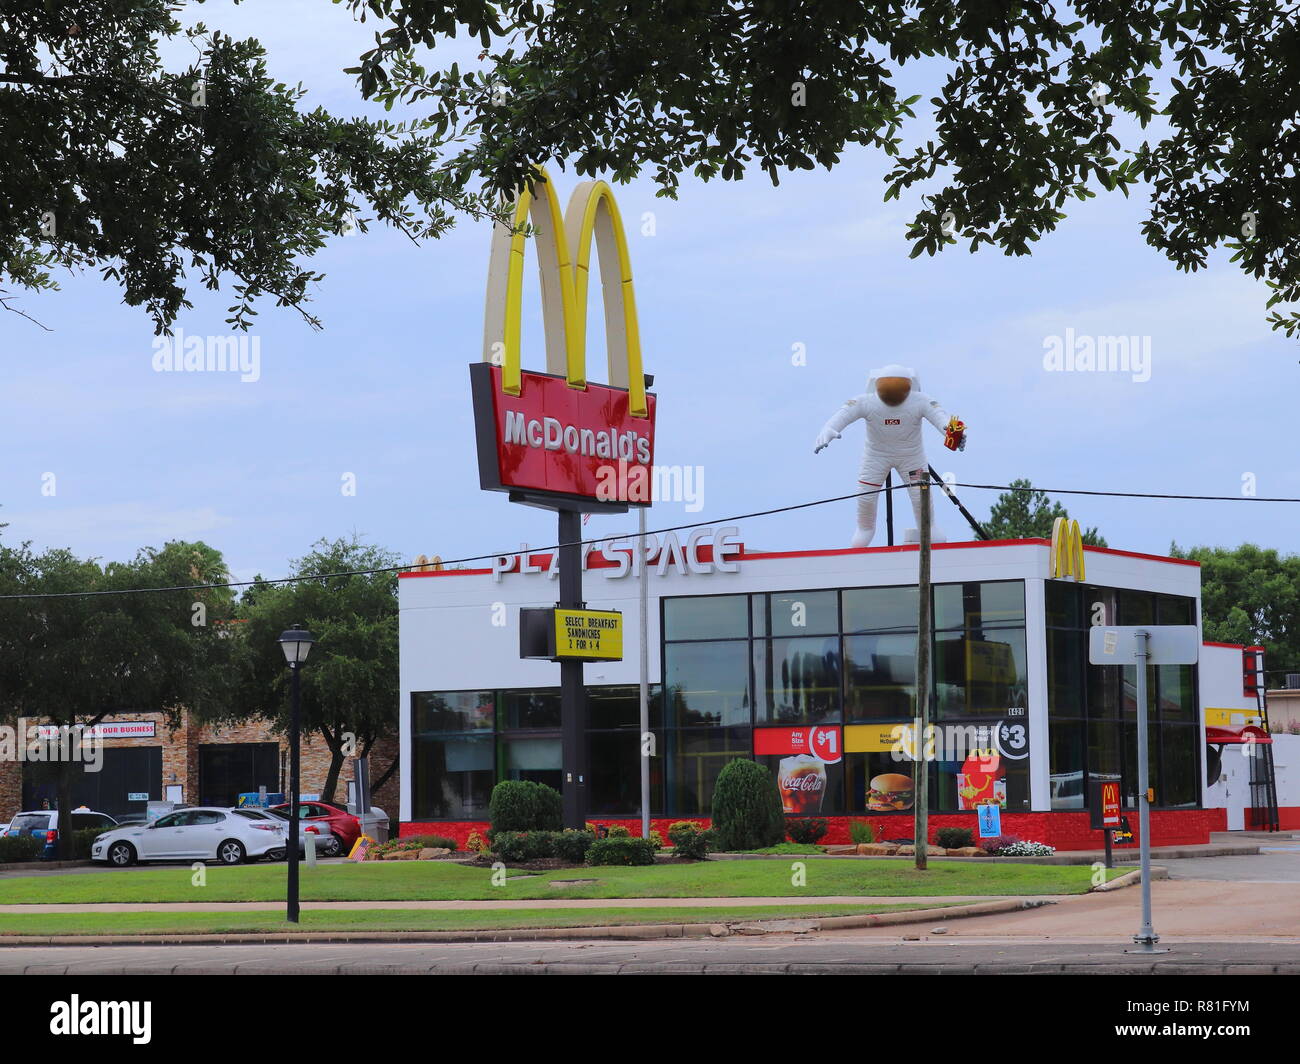 HOUSTON, TEXAS, USA - JUNE 9, 2018: NASA themed McDonald's restaurant in Houston, Texas. A giant astronaut with French fries on rooftop. Stock Photo